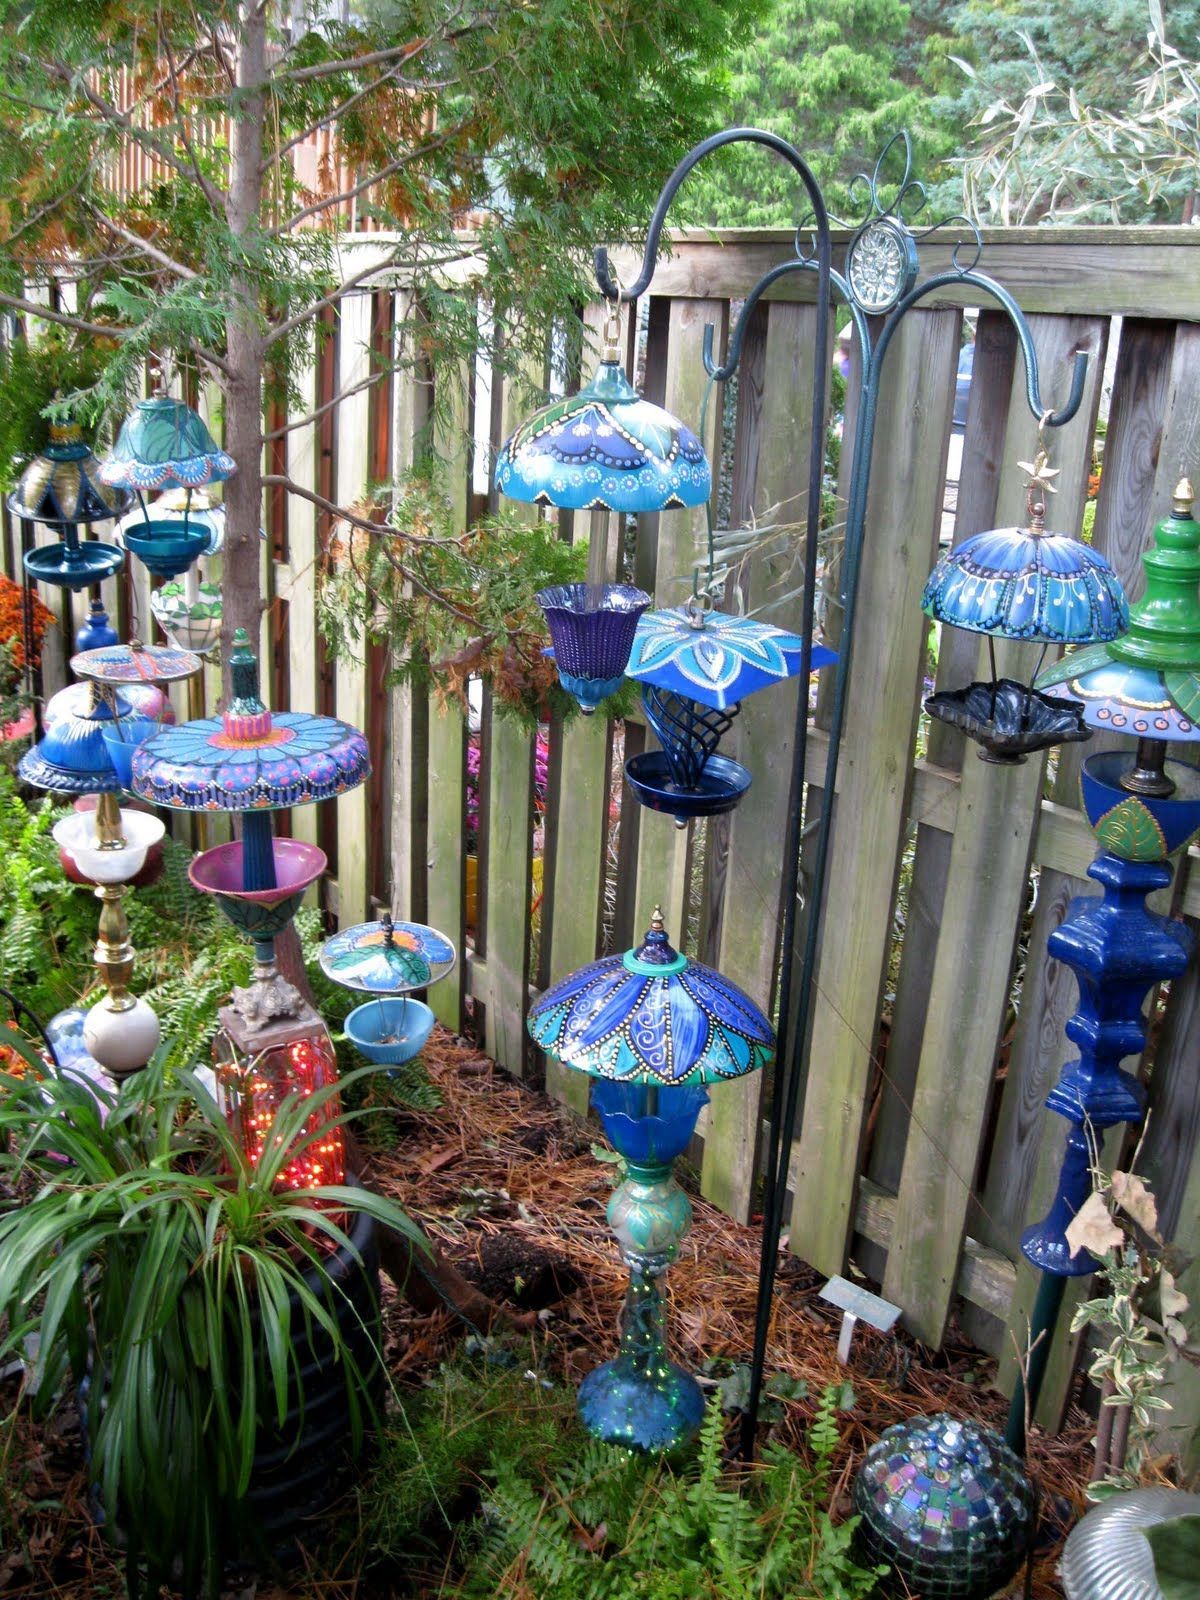 Donnas Art at Mourning Dove Cottage: Whimsical garden lamps and bird feeders